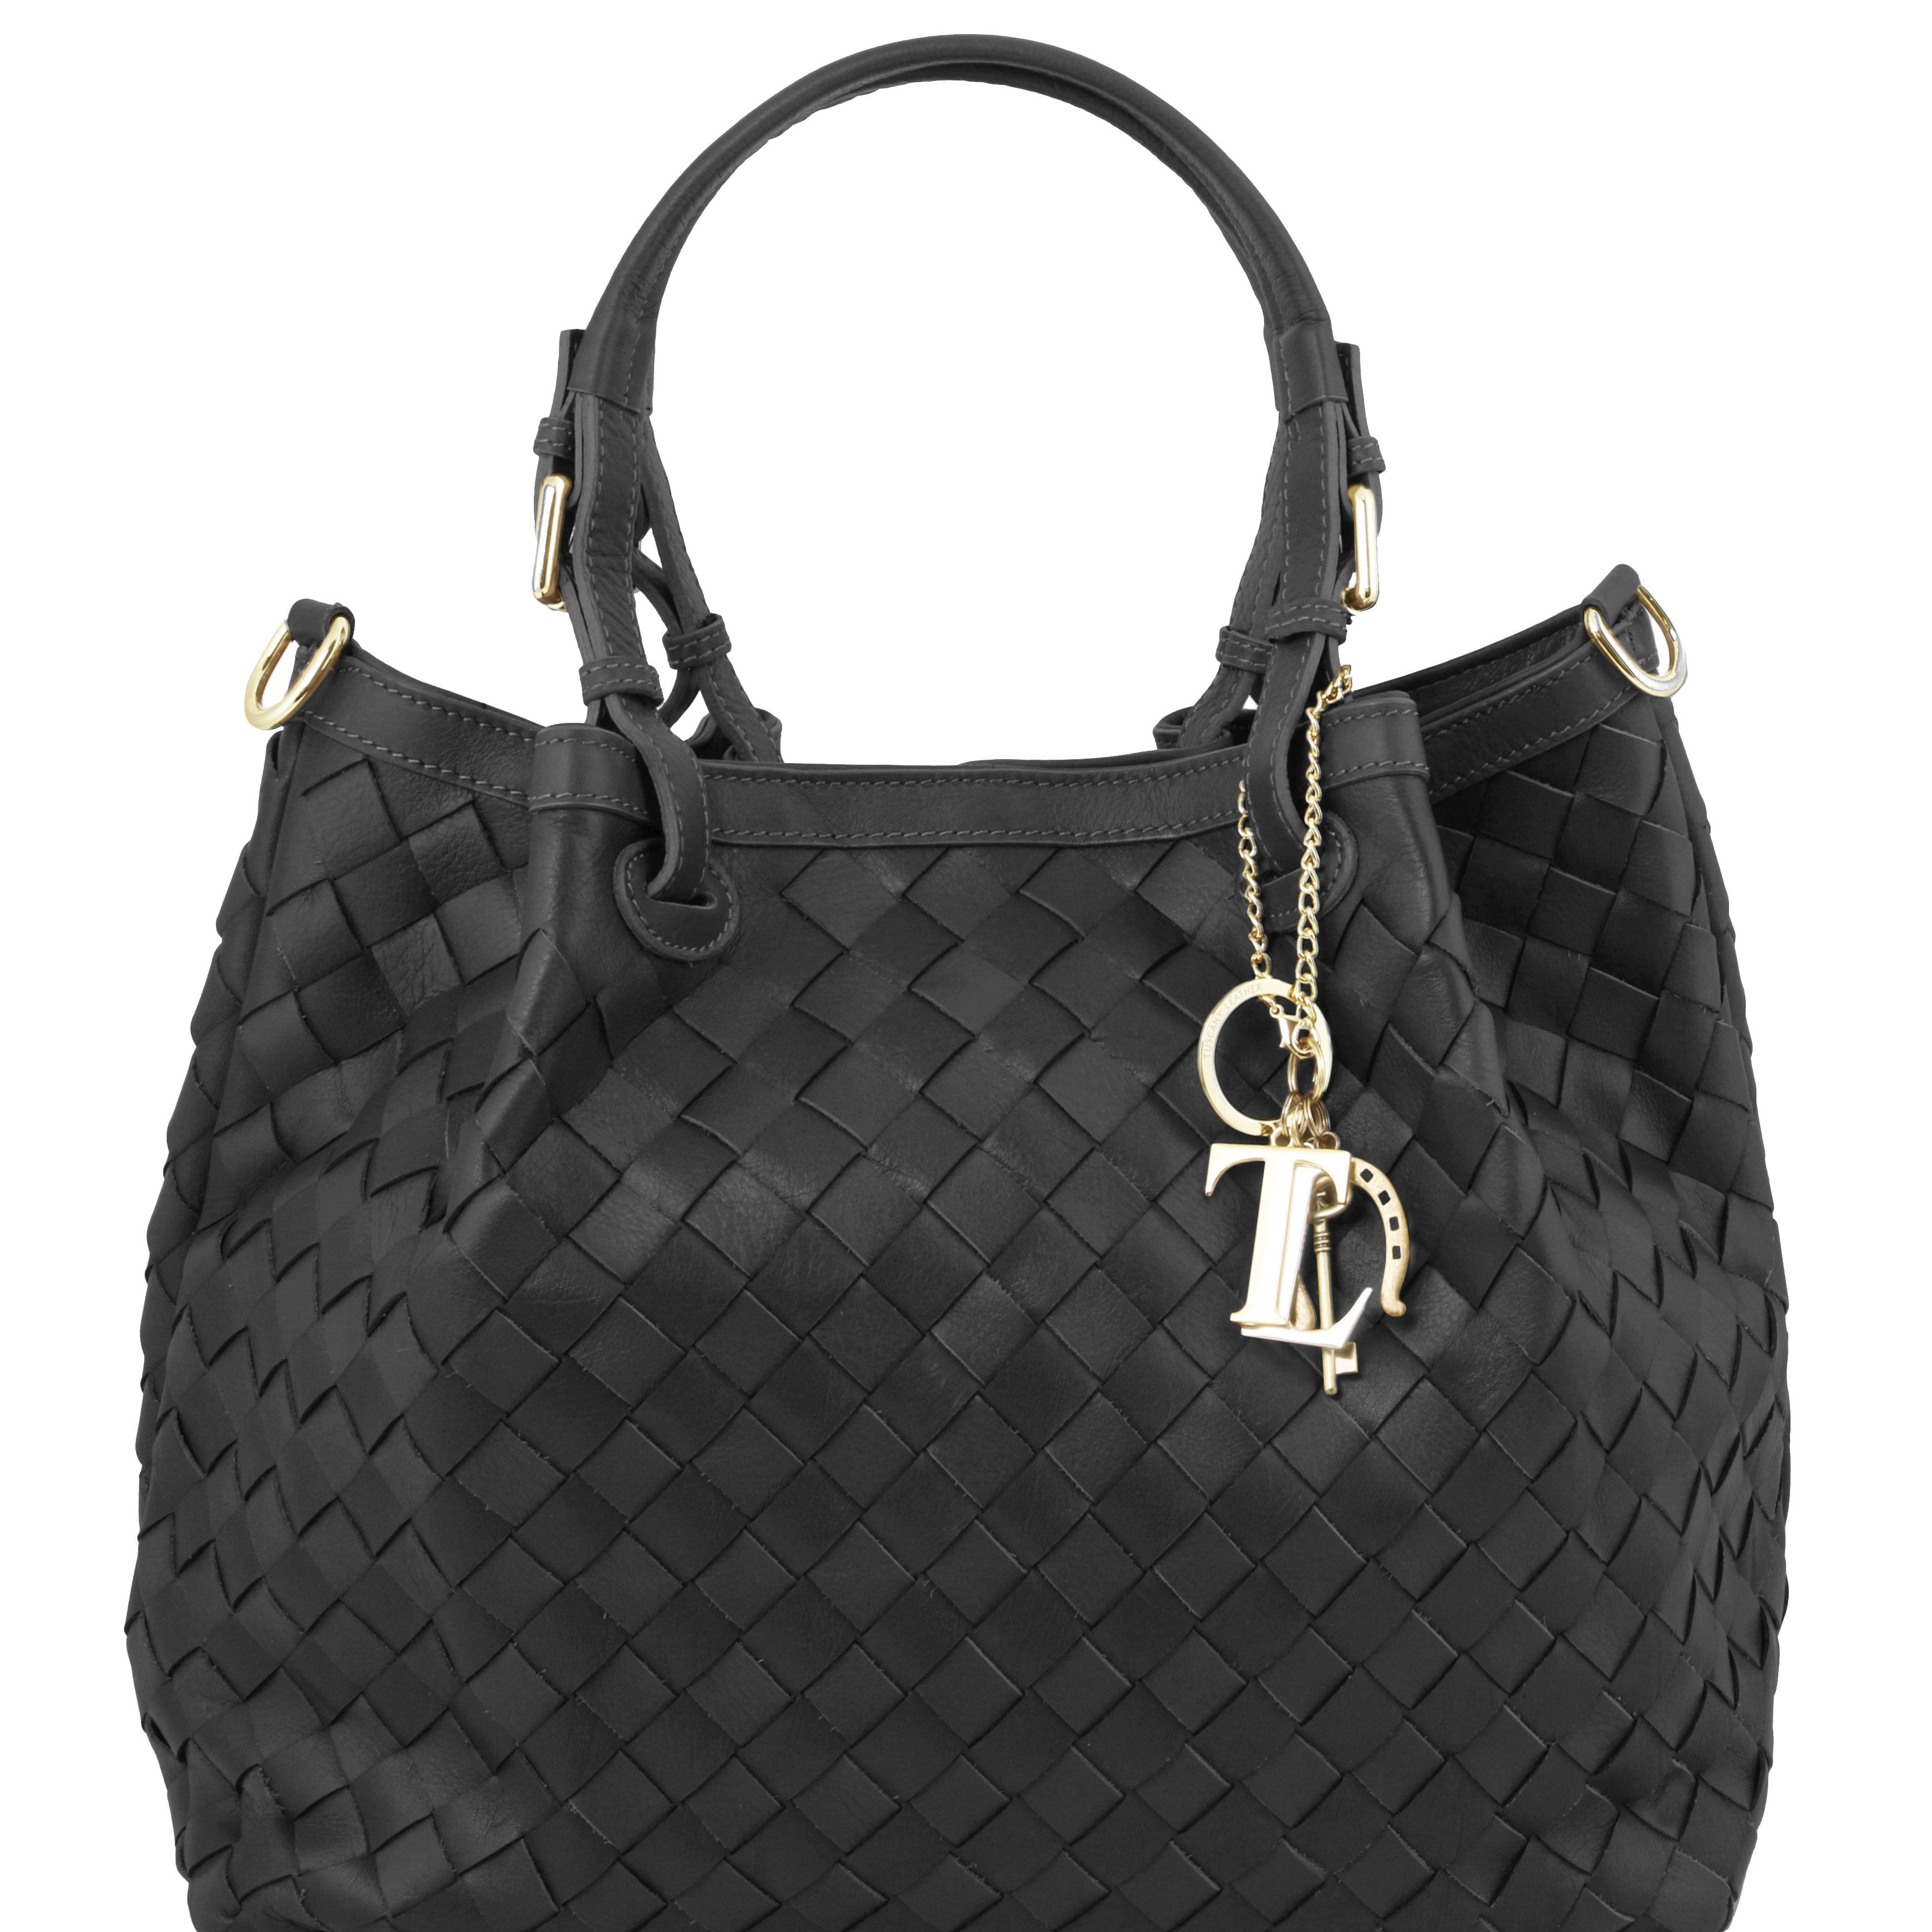 TL KeyLuck Handwoven leather tote Black